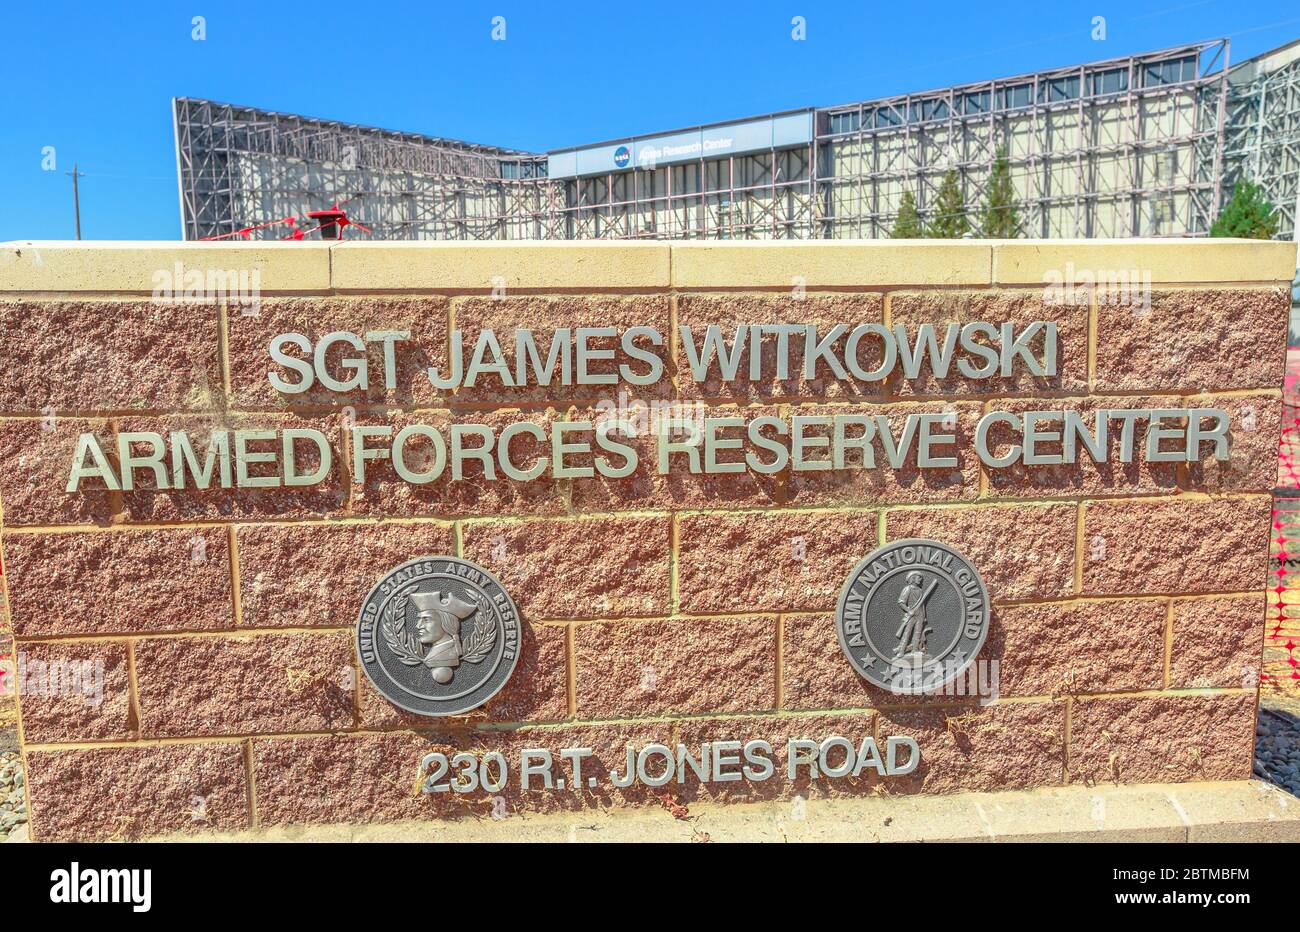 Mountain View, United States - August 15, 2016: James Witkowski Armed Forces Reserve Center, at 230 jones road at Moffett Federal Airfield. NASA Stock Photo